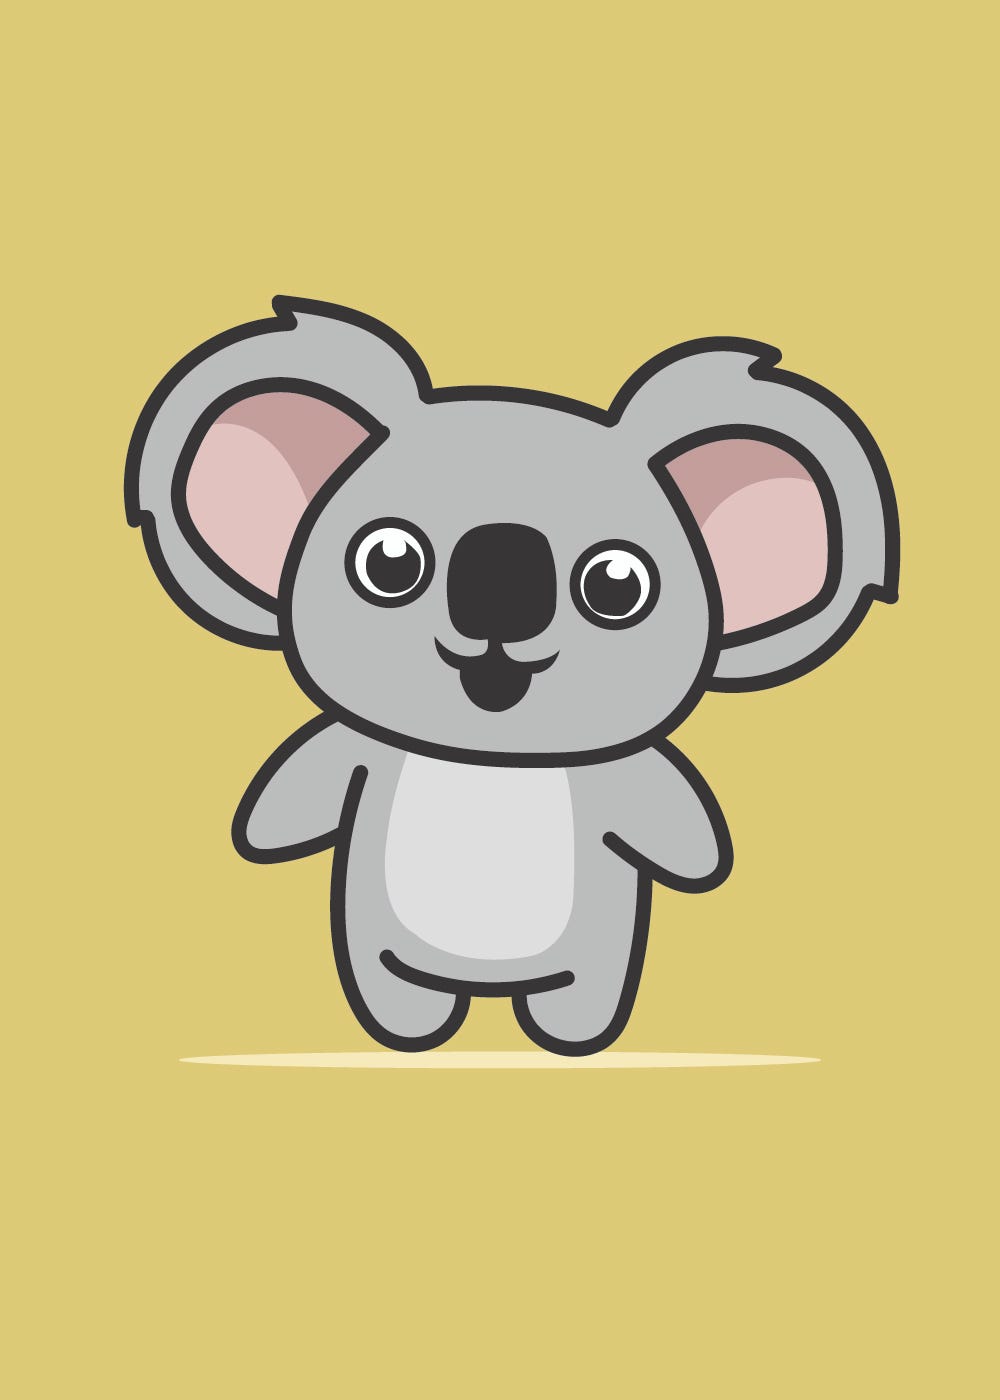 How To Draw A Cute Koala — Step by Step Guide, by Storiespub